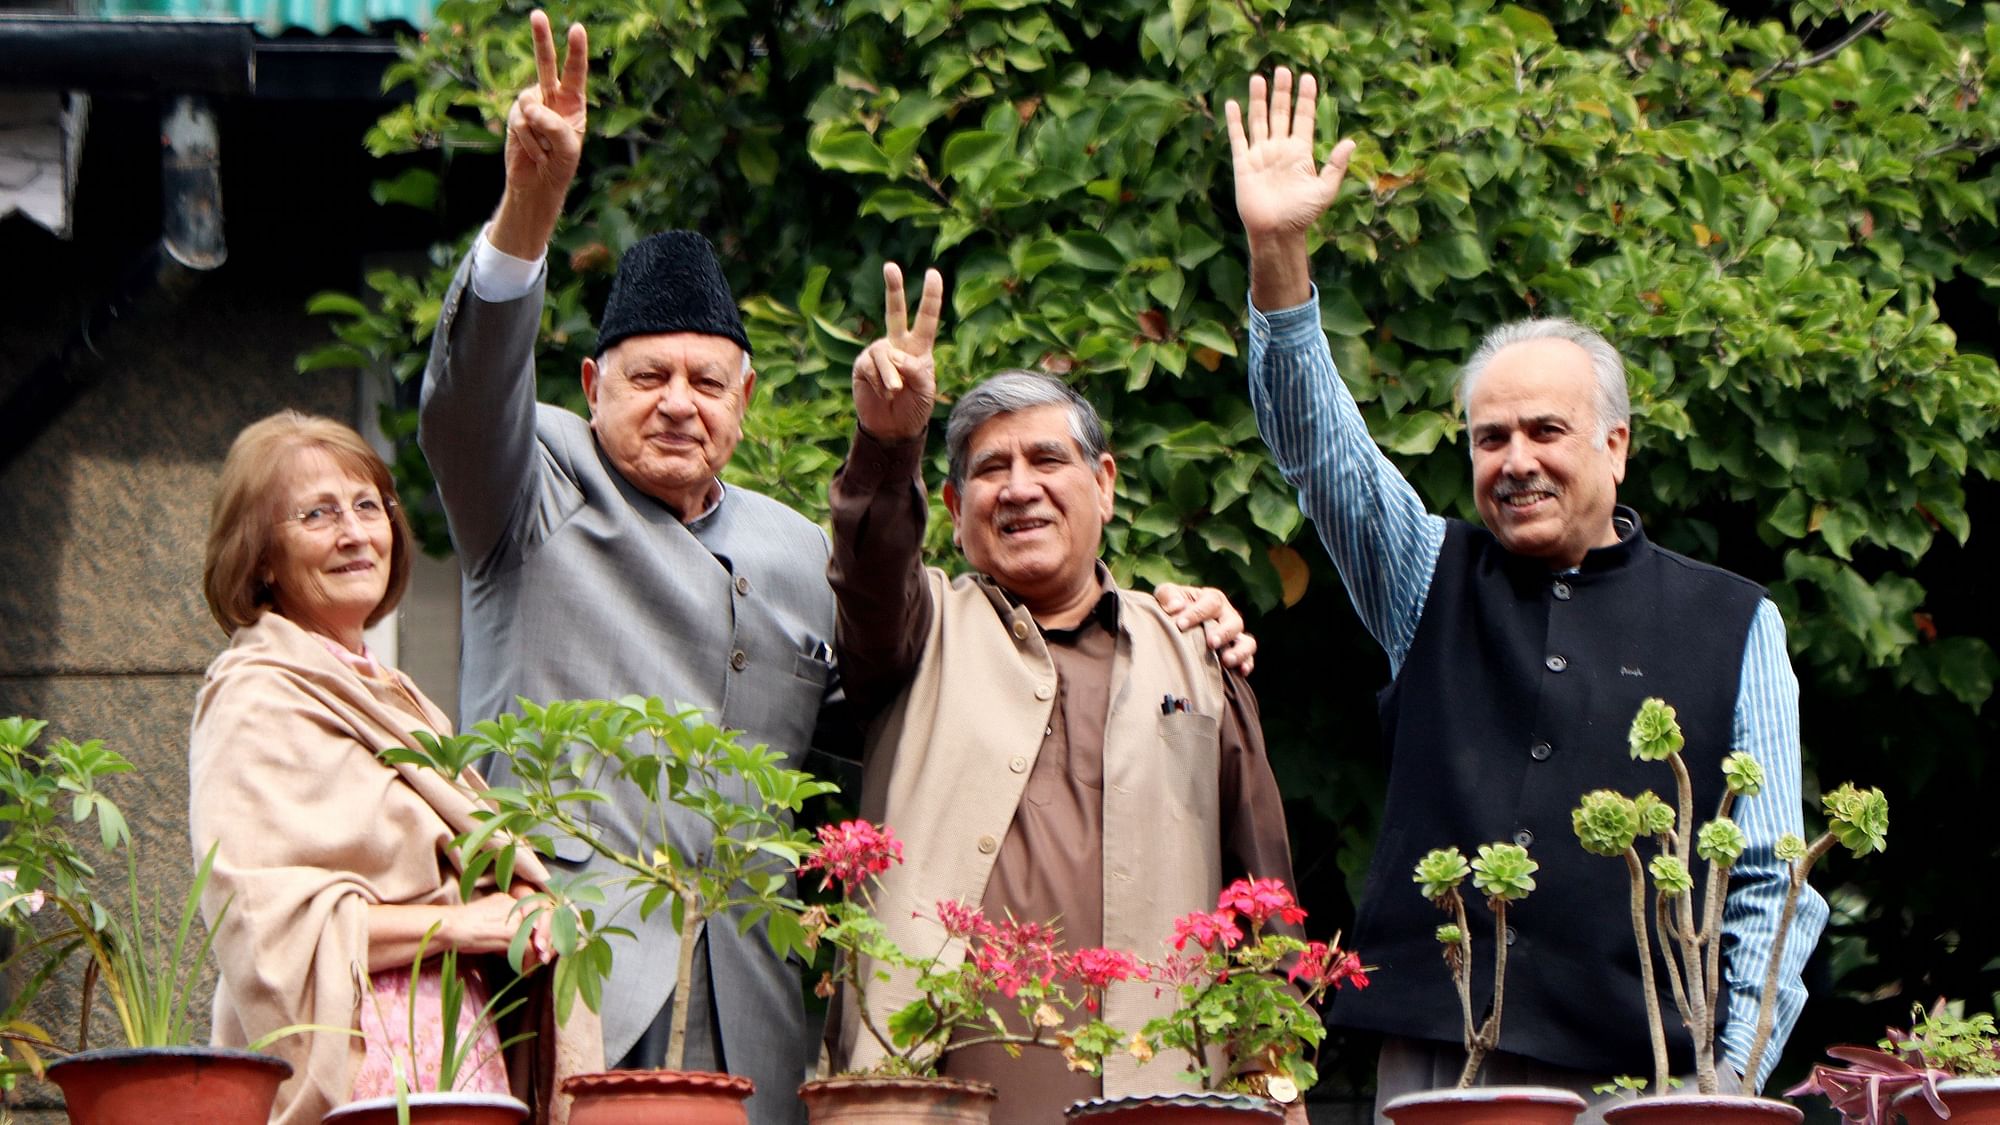 National Conference President Farooq Abdullah, his wife Molly Abdullah, party leaders Mohammad Akbar Lone and Hasnain Masoodi wave towards media persons at their residence in Gupkar, Srinagar, Sunday, 6 October.